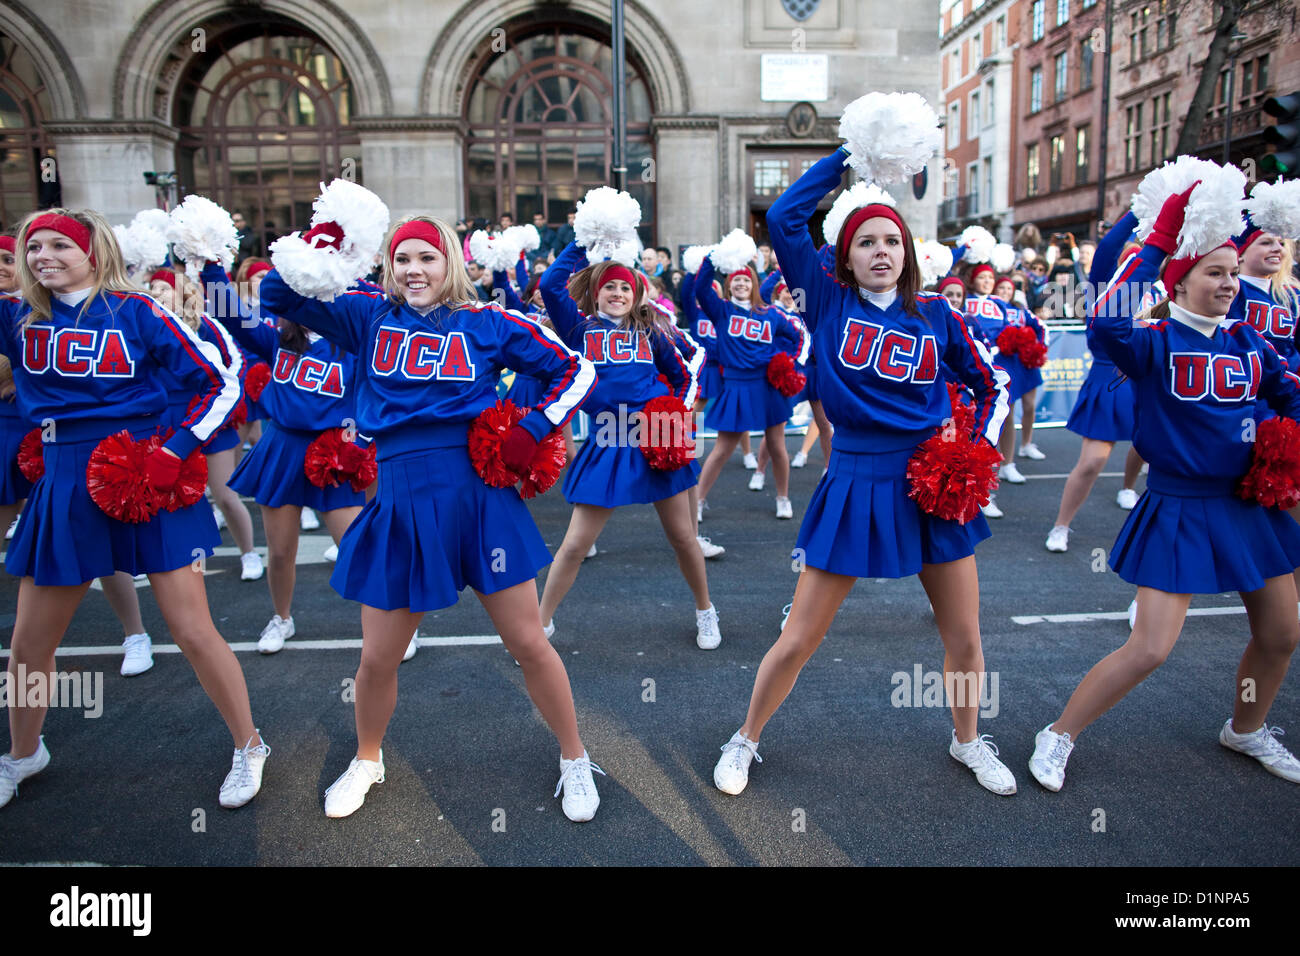 London's New Year's Day Parade 2013, England, UK. 01.01.2013 All American cheerleaders and dancers from the USA perform 'Starship' at the London's New Year's Day Parade, Central London, UK. Stock Photo